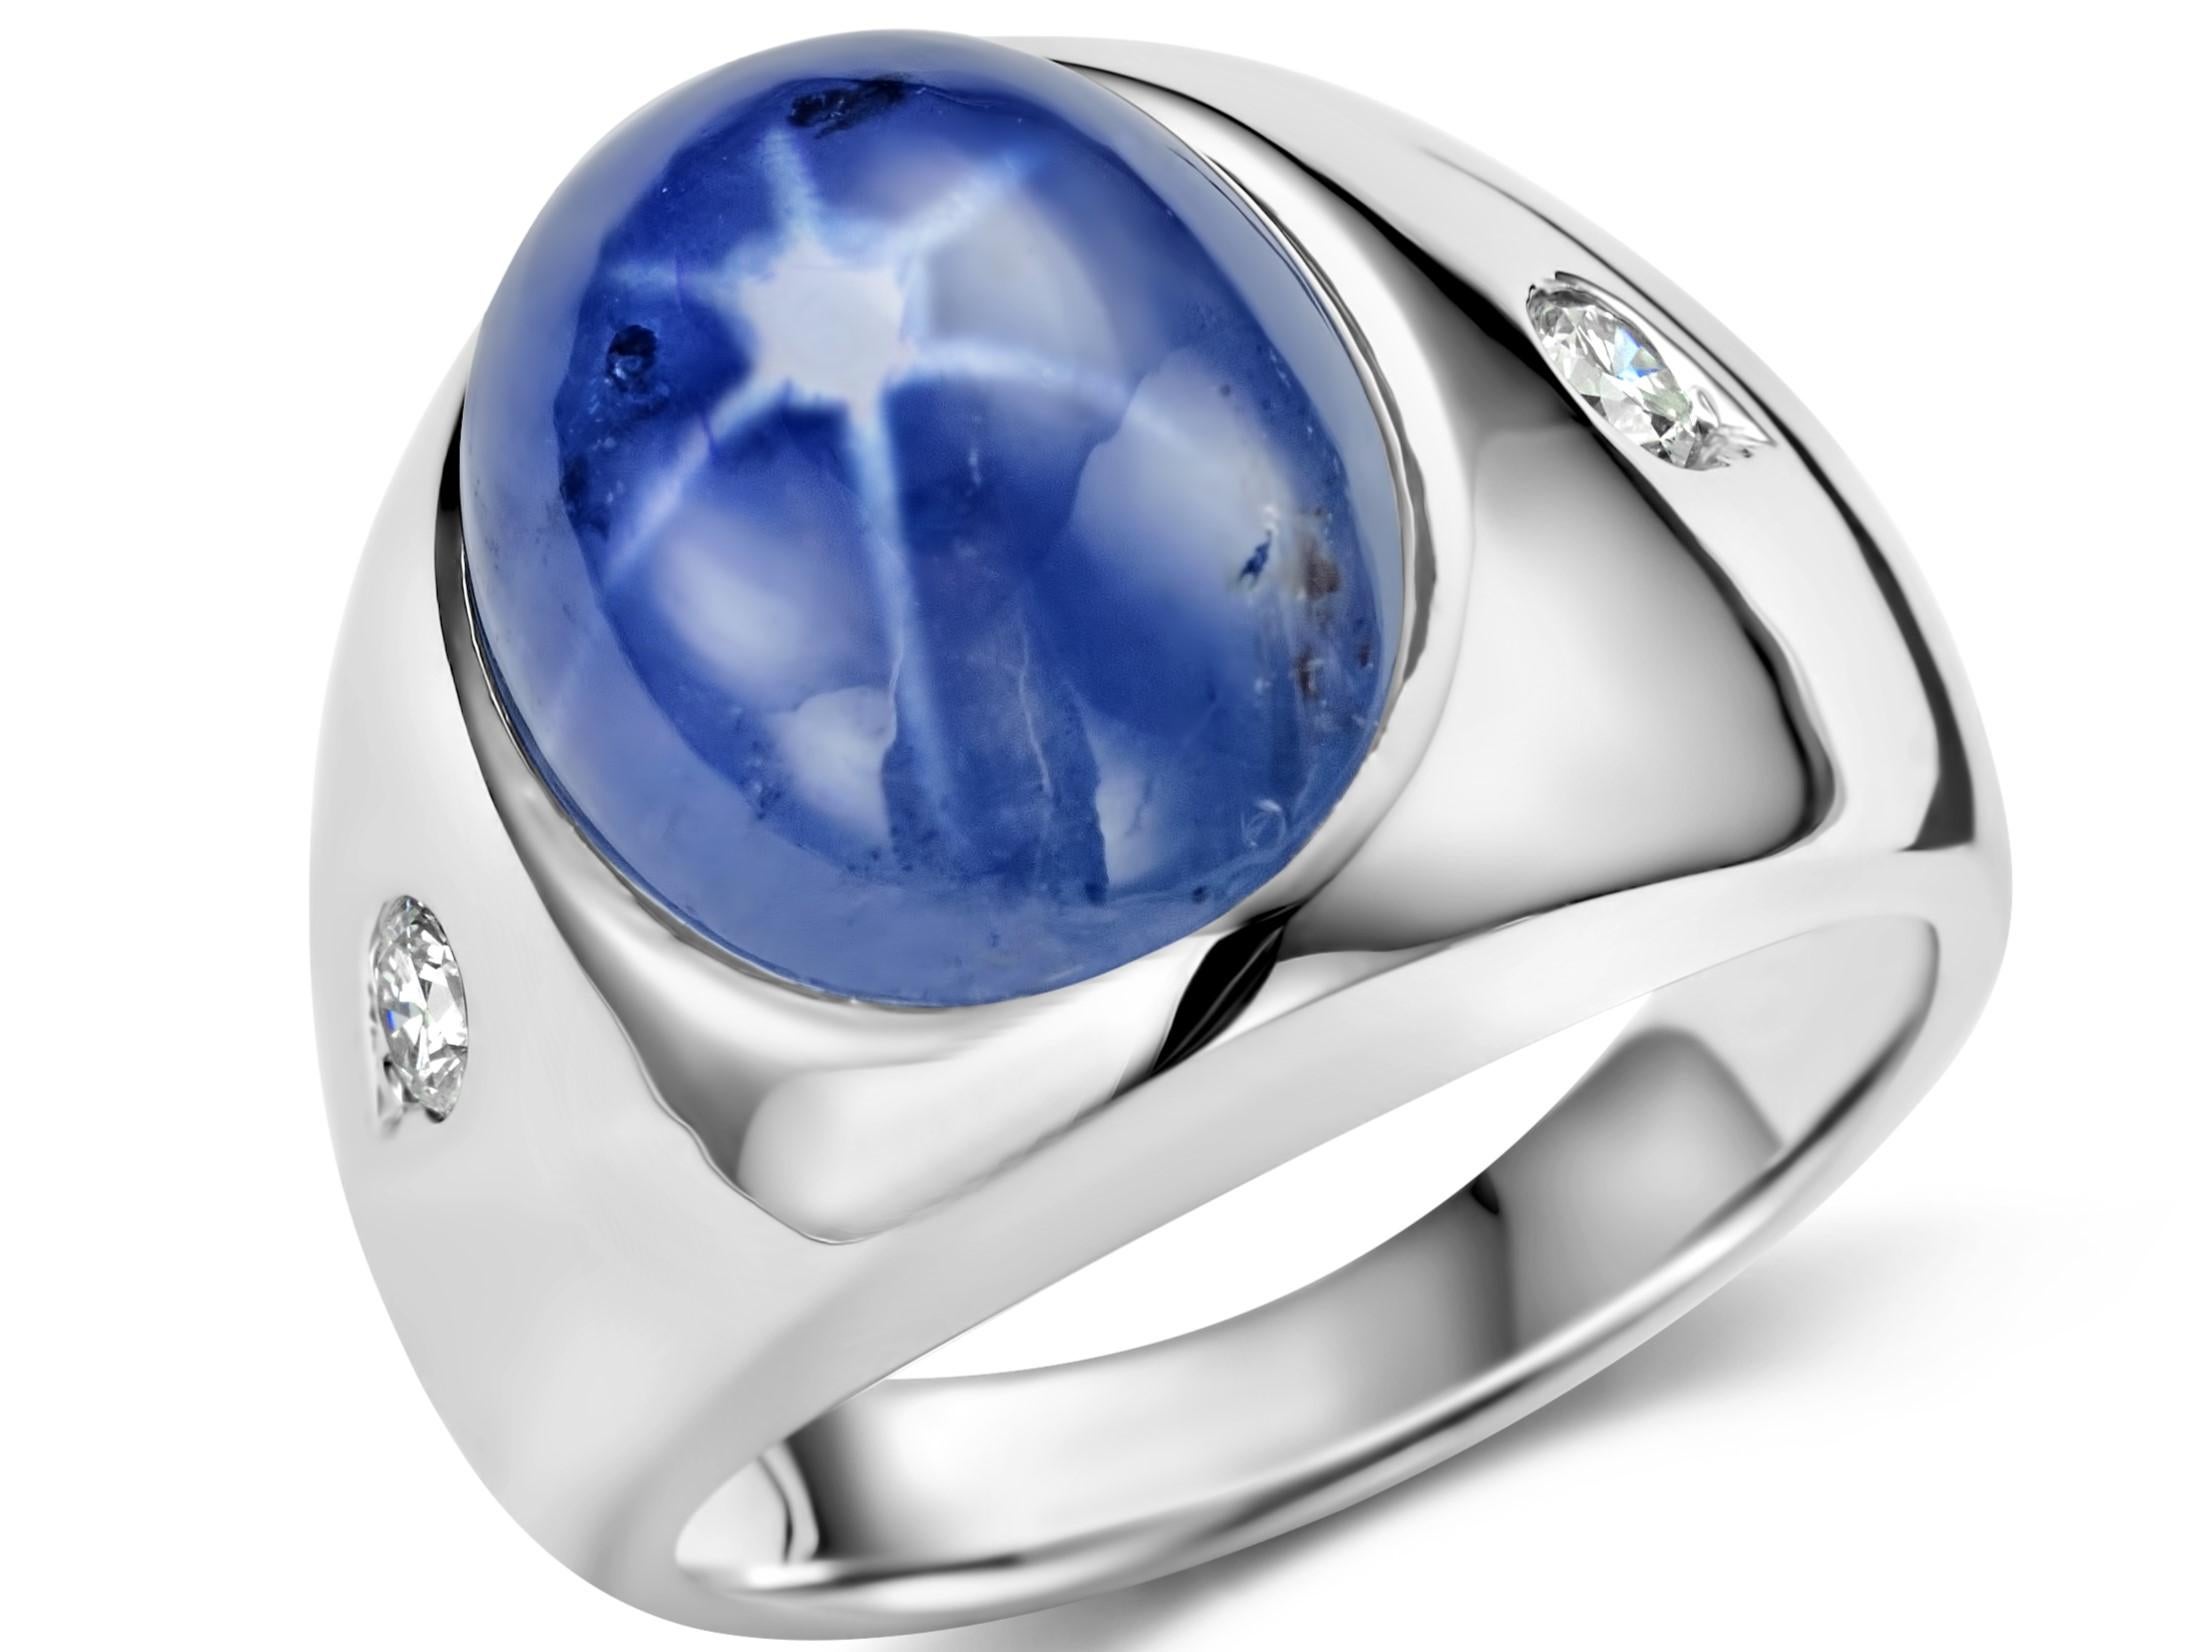 Magnificent 18kt White Gold Ring With 14.5ct Star Sapphire & Diamonds ,Estate Sultan Of Oman Qaboos Bin Said

Sapphire: Blue Cabochon, Natural No Heat Star Burma sapphire, 14.5 ct. No treatment. Comes with a GRS certificate GRS2022-117270

Diamond: